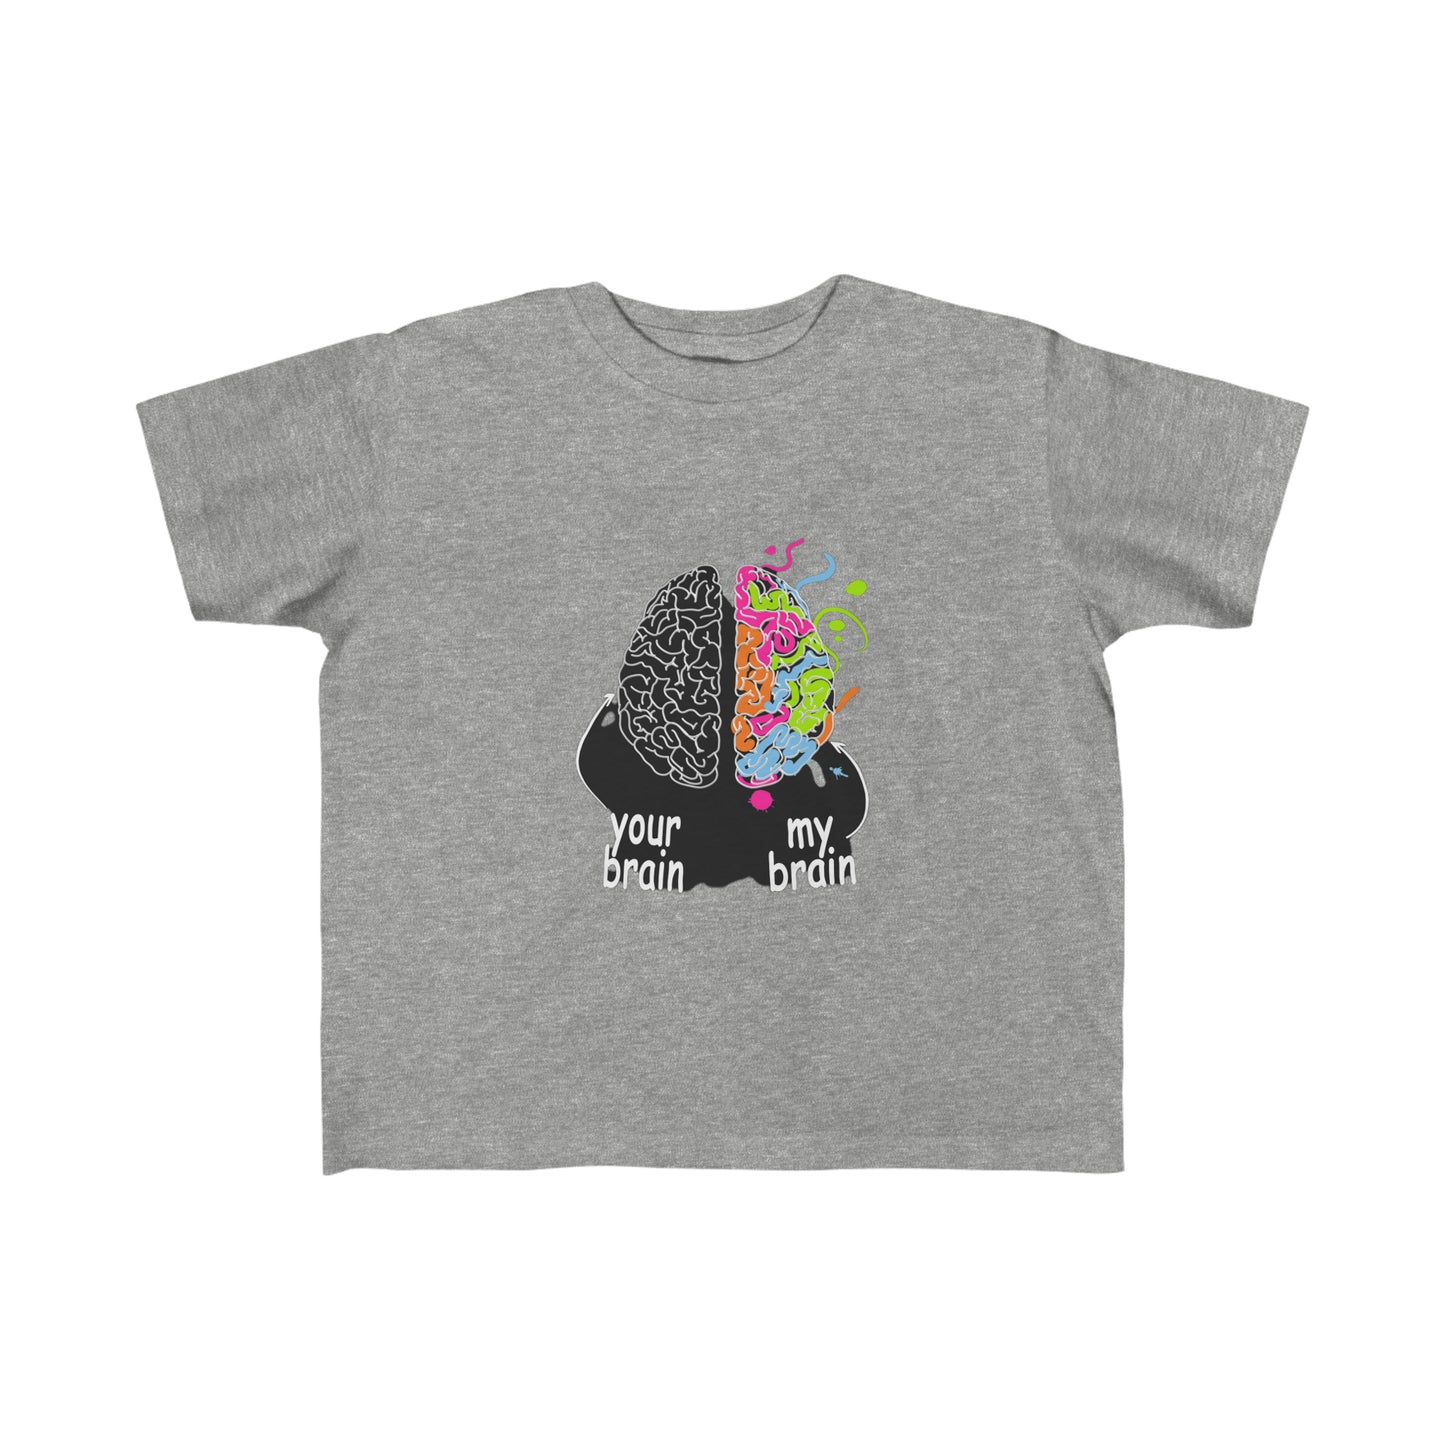 Cherished Comfort: Toddler's Fine Jersey Tee